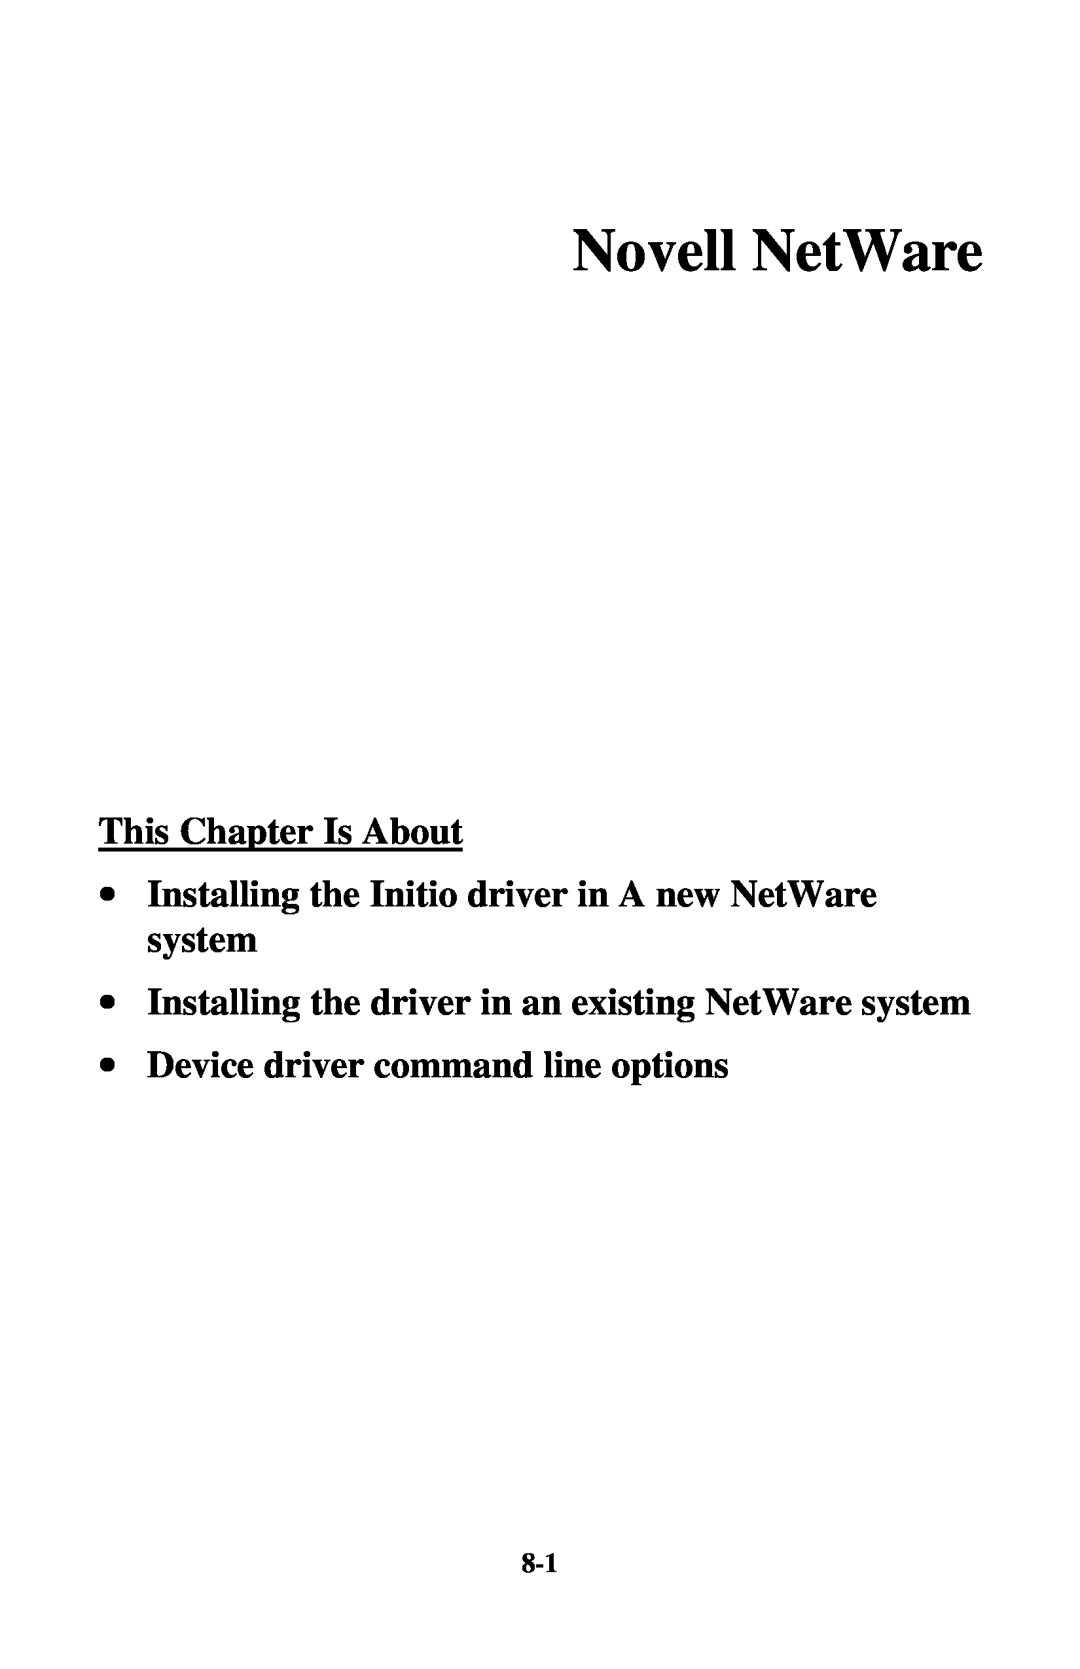 Initio INI-9100UW Novell NetWare, ∙ Installing the Initio driver in A new NetWare system, This Chapter Is About 